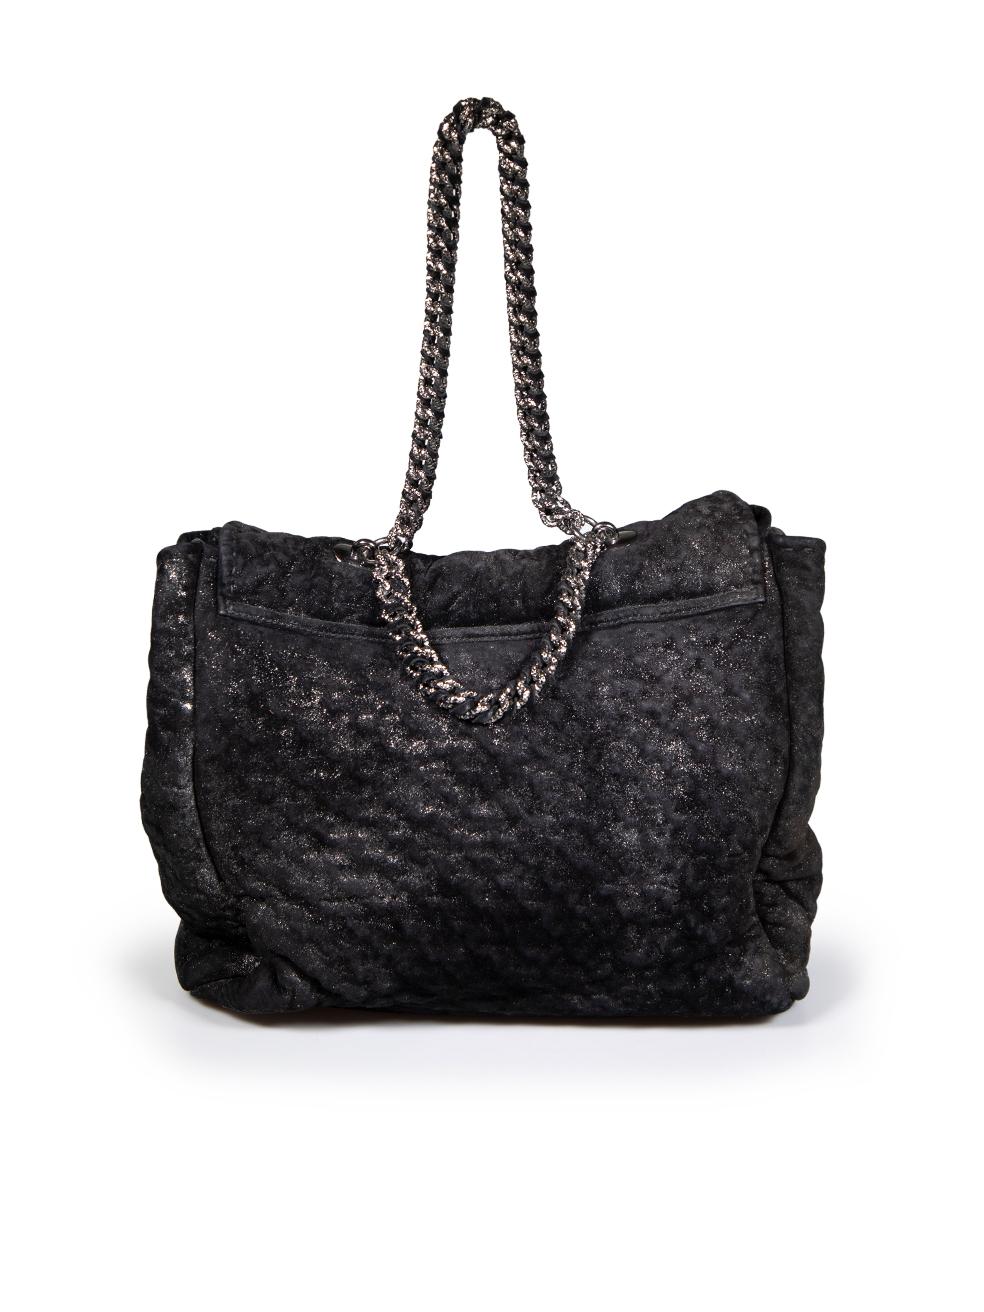 Ermanno Scervino Black Metallic Fabourg Quilted Bag In Good Condition For Sale In London, GB